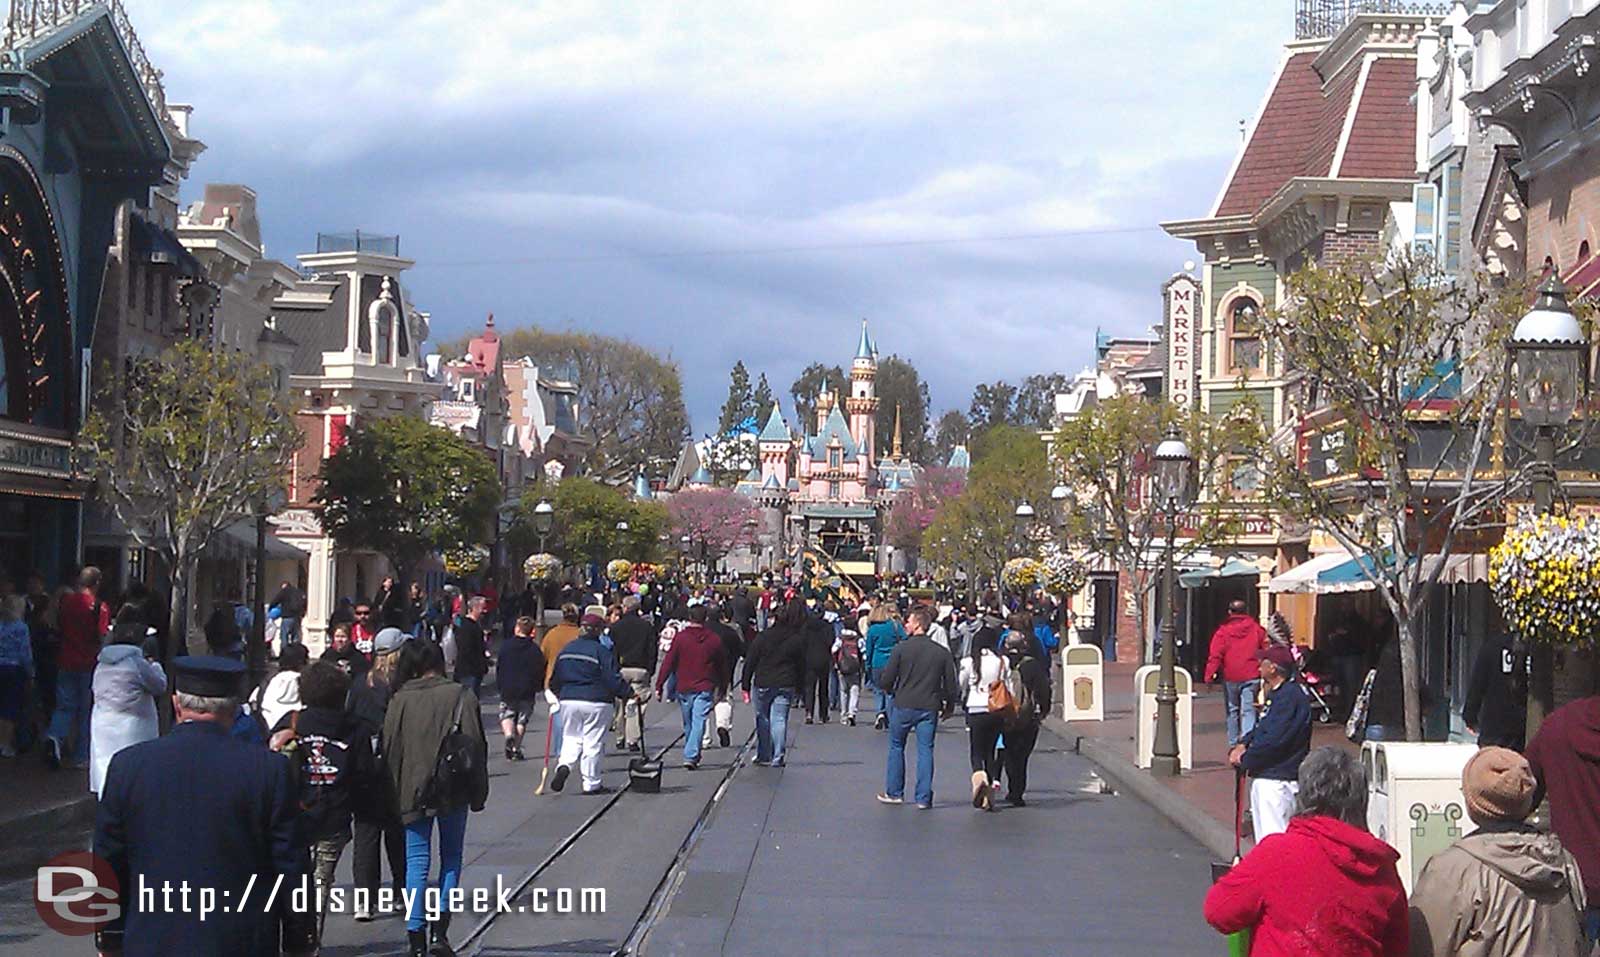 Just arrived at the Disneyland resort for the afternoon. A look toward the Castle on Main Street